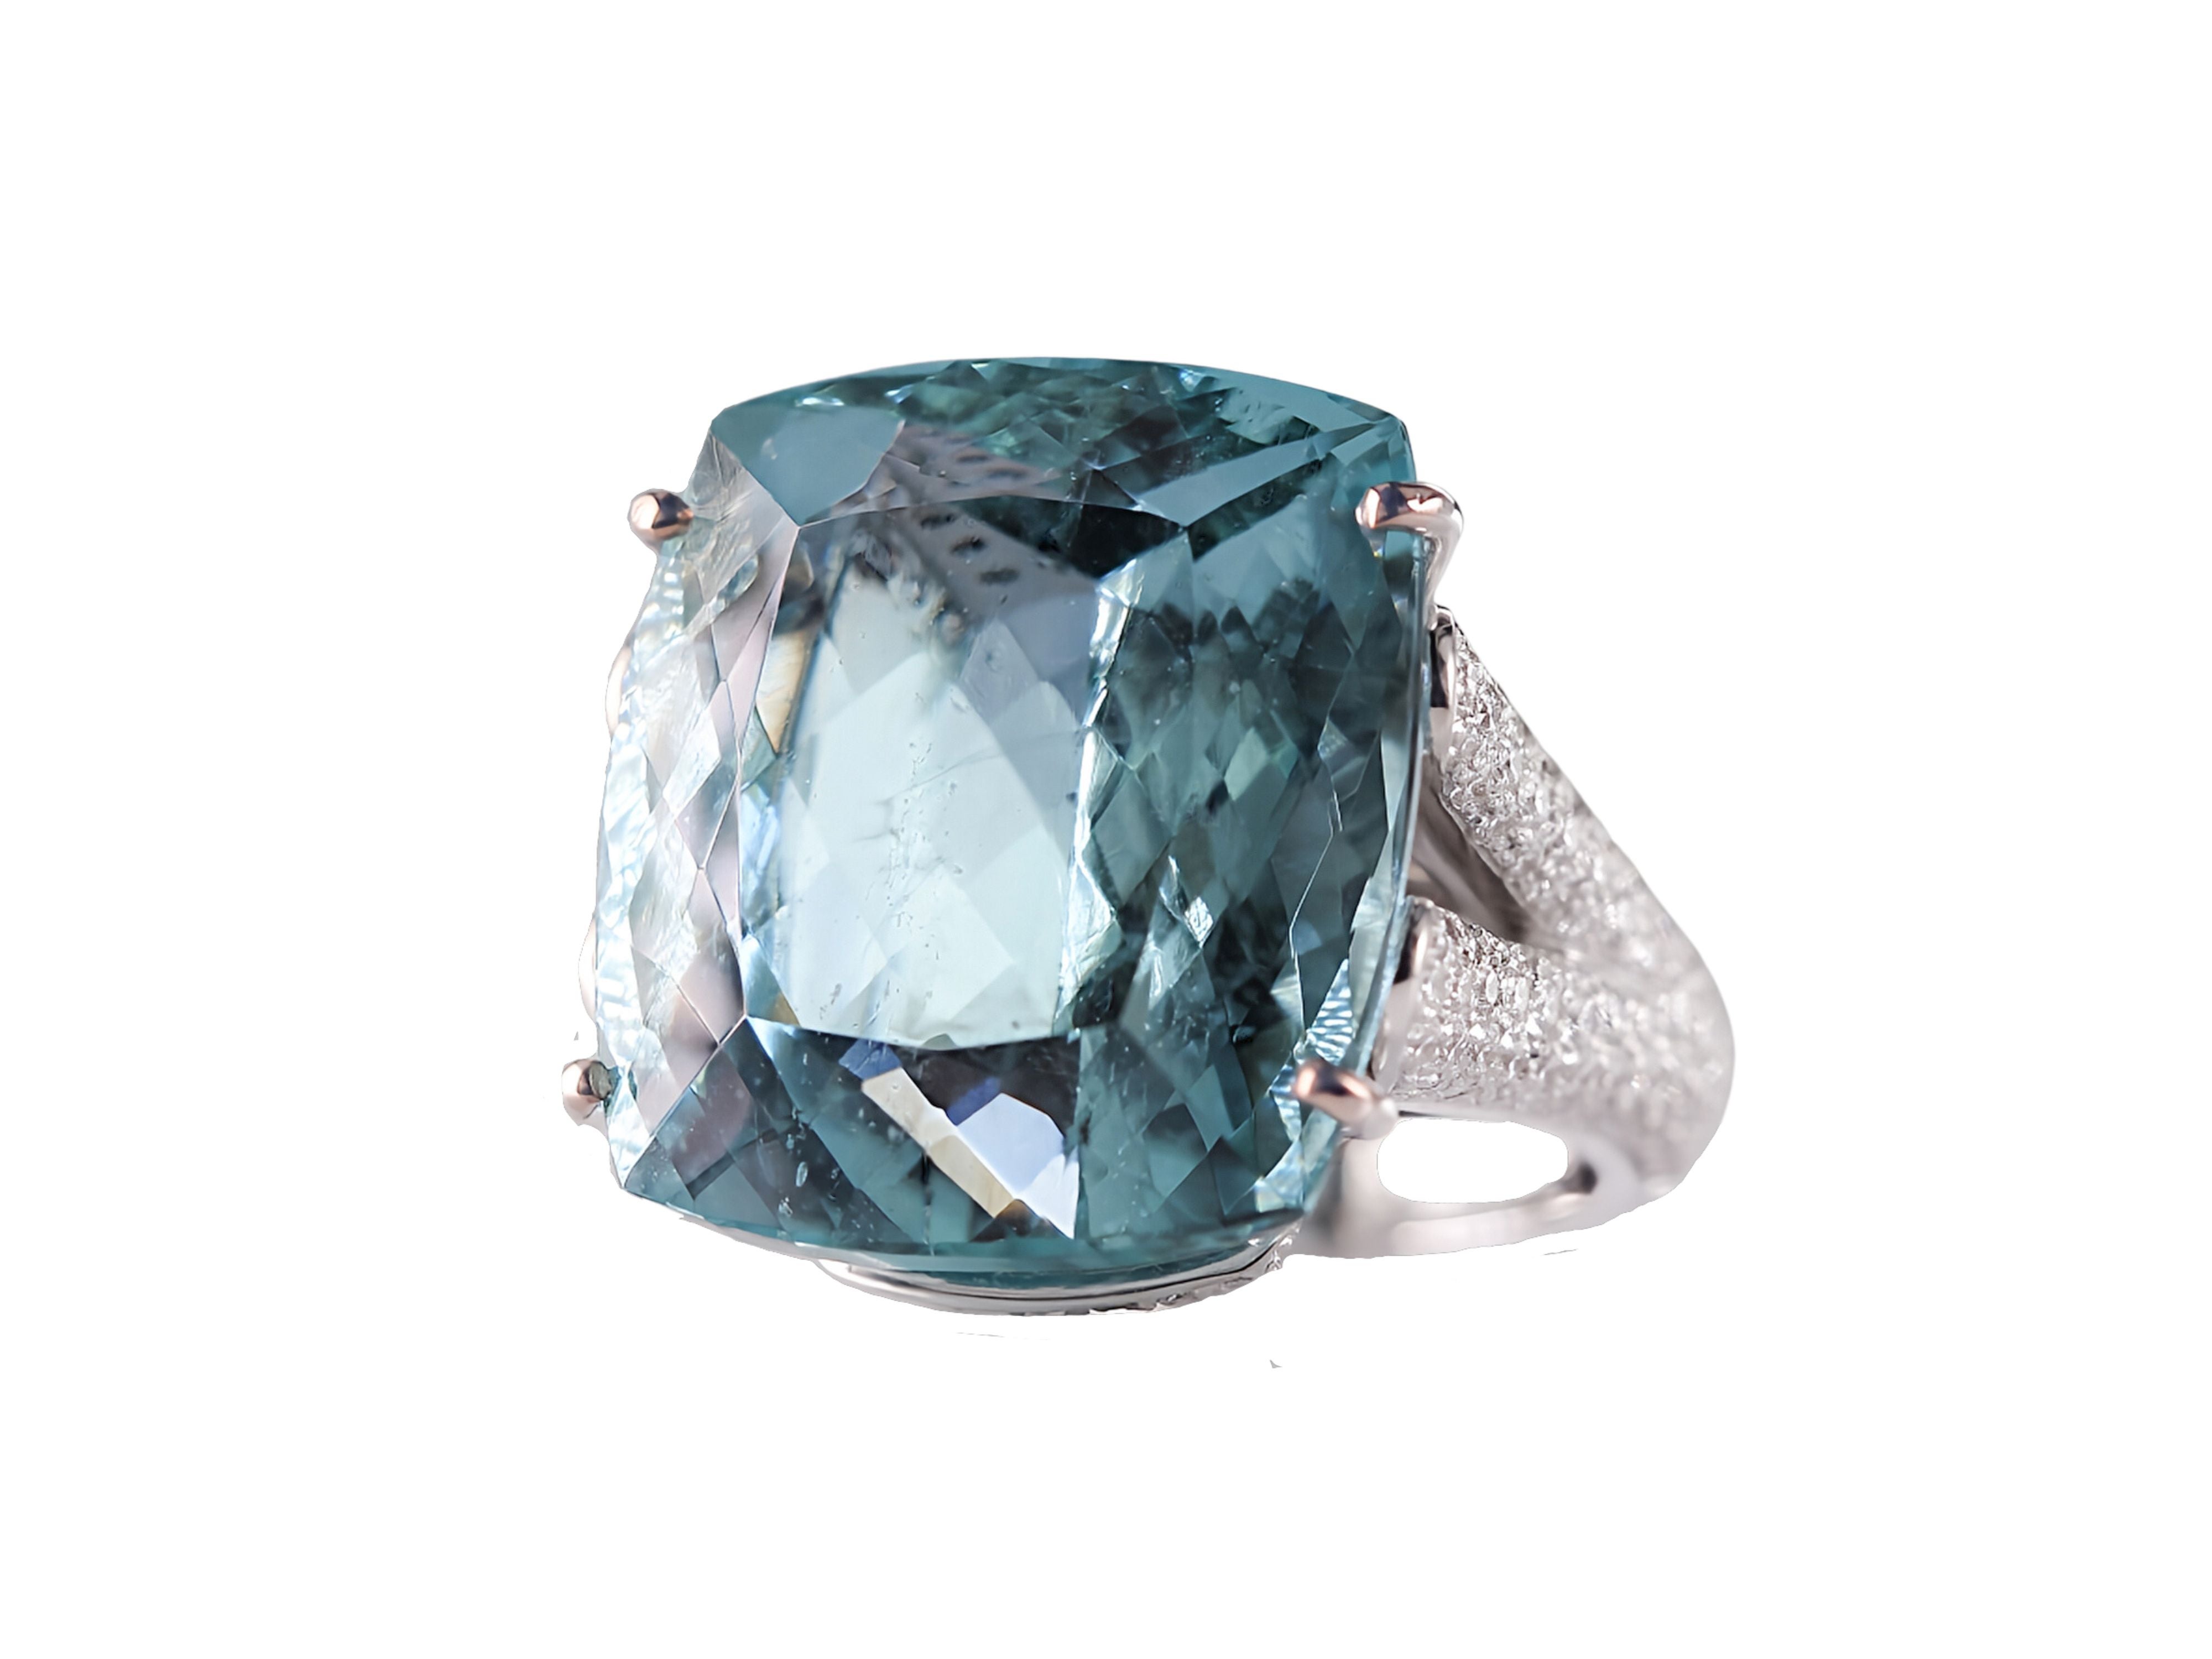 Explore the timeless elegance of this 18 kt white gold ring set with a 47 carat natural Aquamarine and white Diamonds. The main stone, a sea-blue colour with slight nuances, is the centrepiece of this essential and contemporary design.

Handmade in